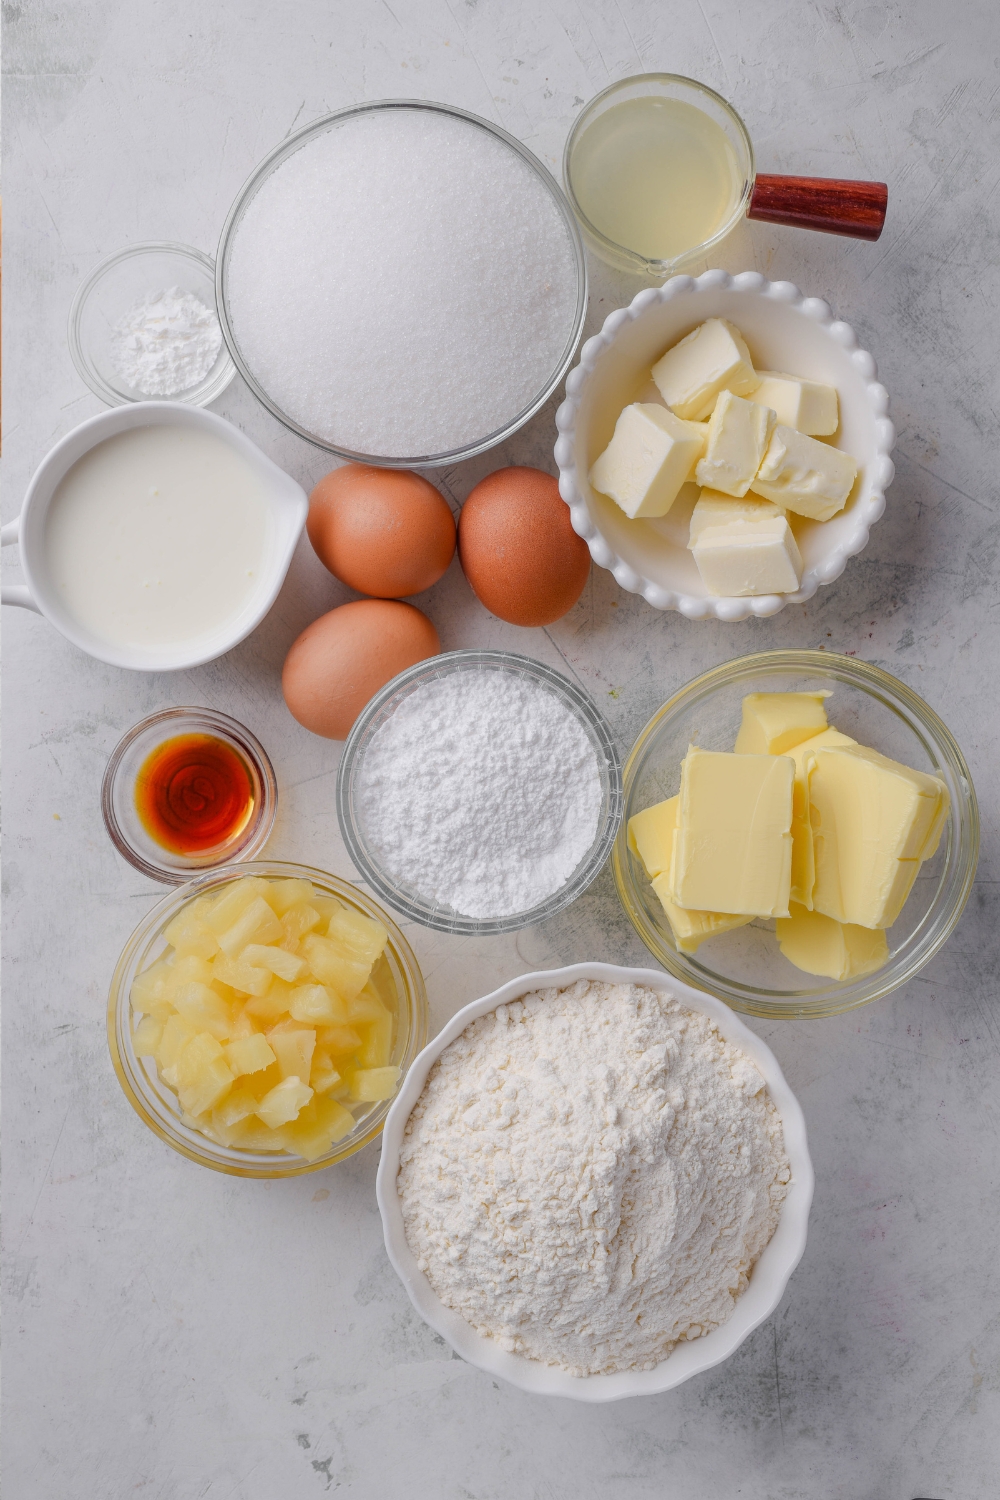 Flour, pineapple, butter, powdered sugar, vanilla, vegetable shortening, eggs, buttermilk, sugar, and pineapple juice are all in separate bowls on a counter top.